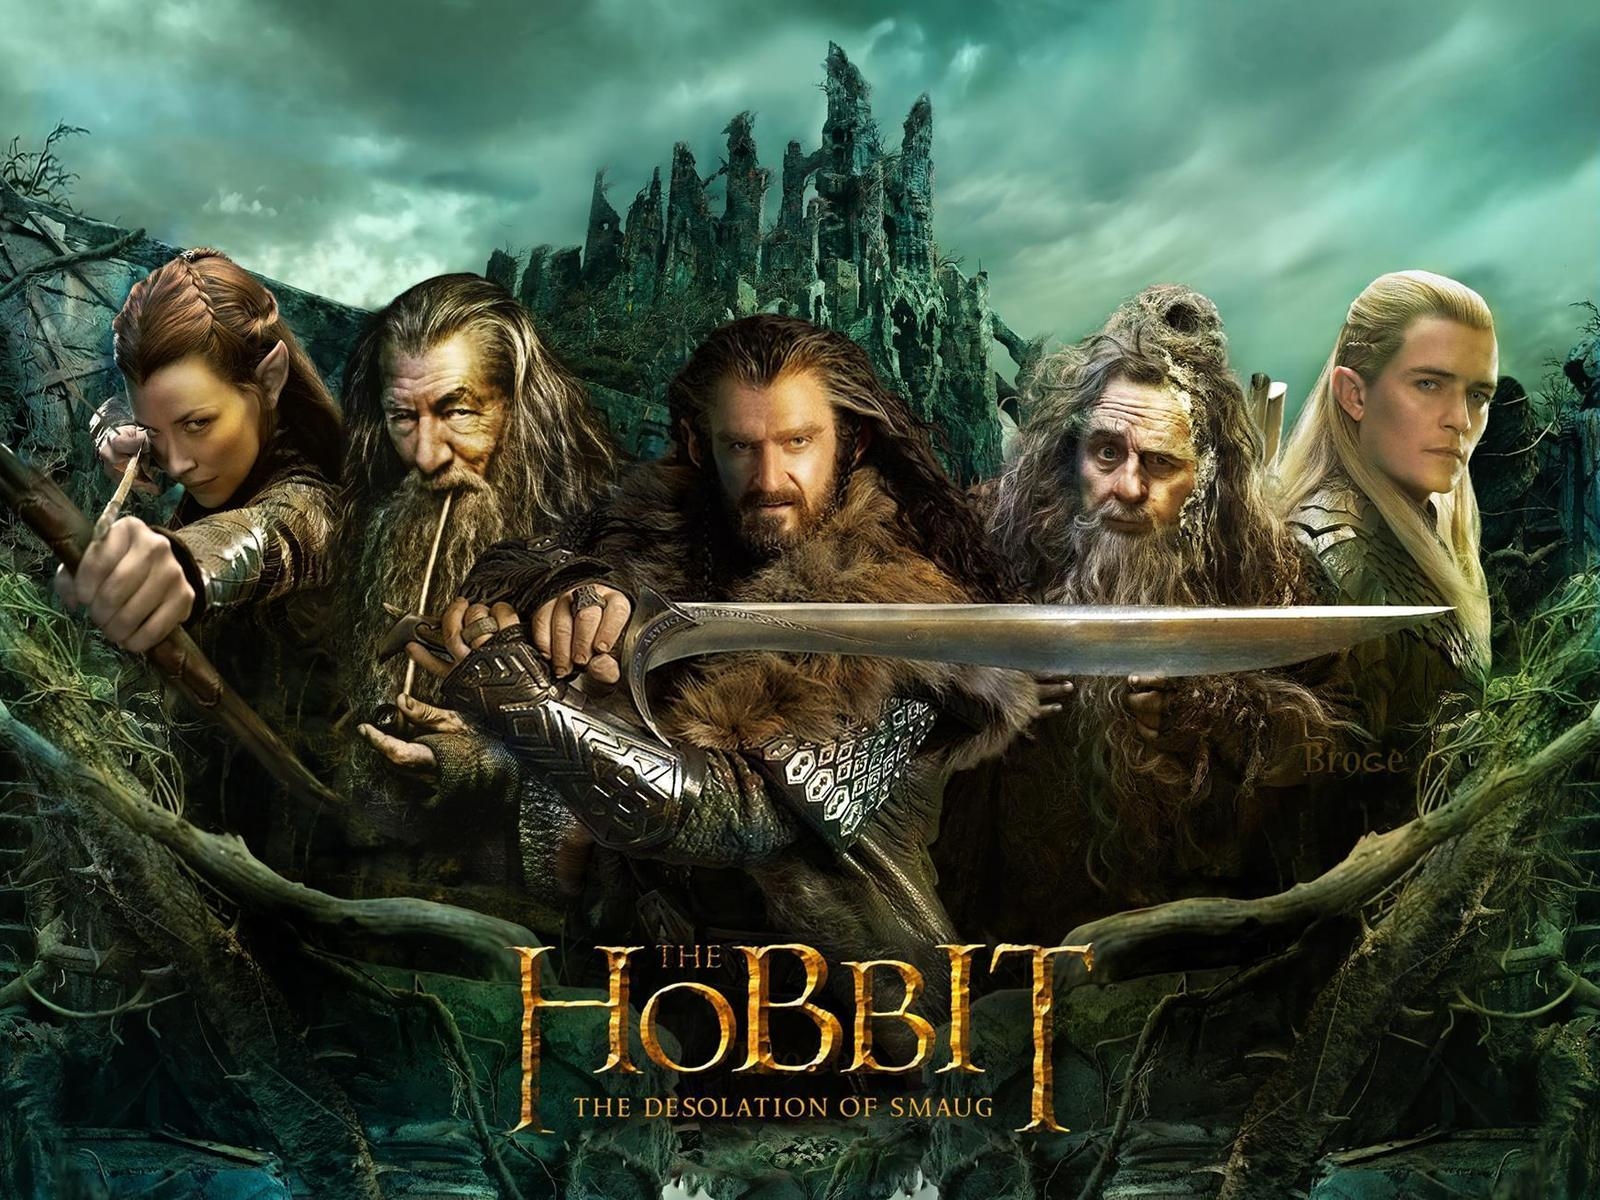  The Hobbit The Desolation of Smaug Poster for 1600 x 1200 resolution